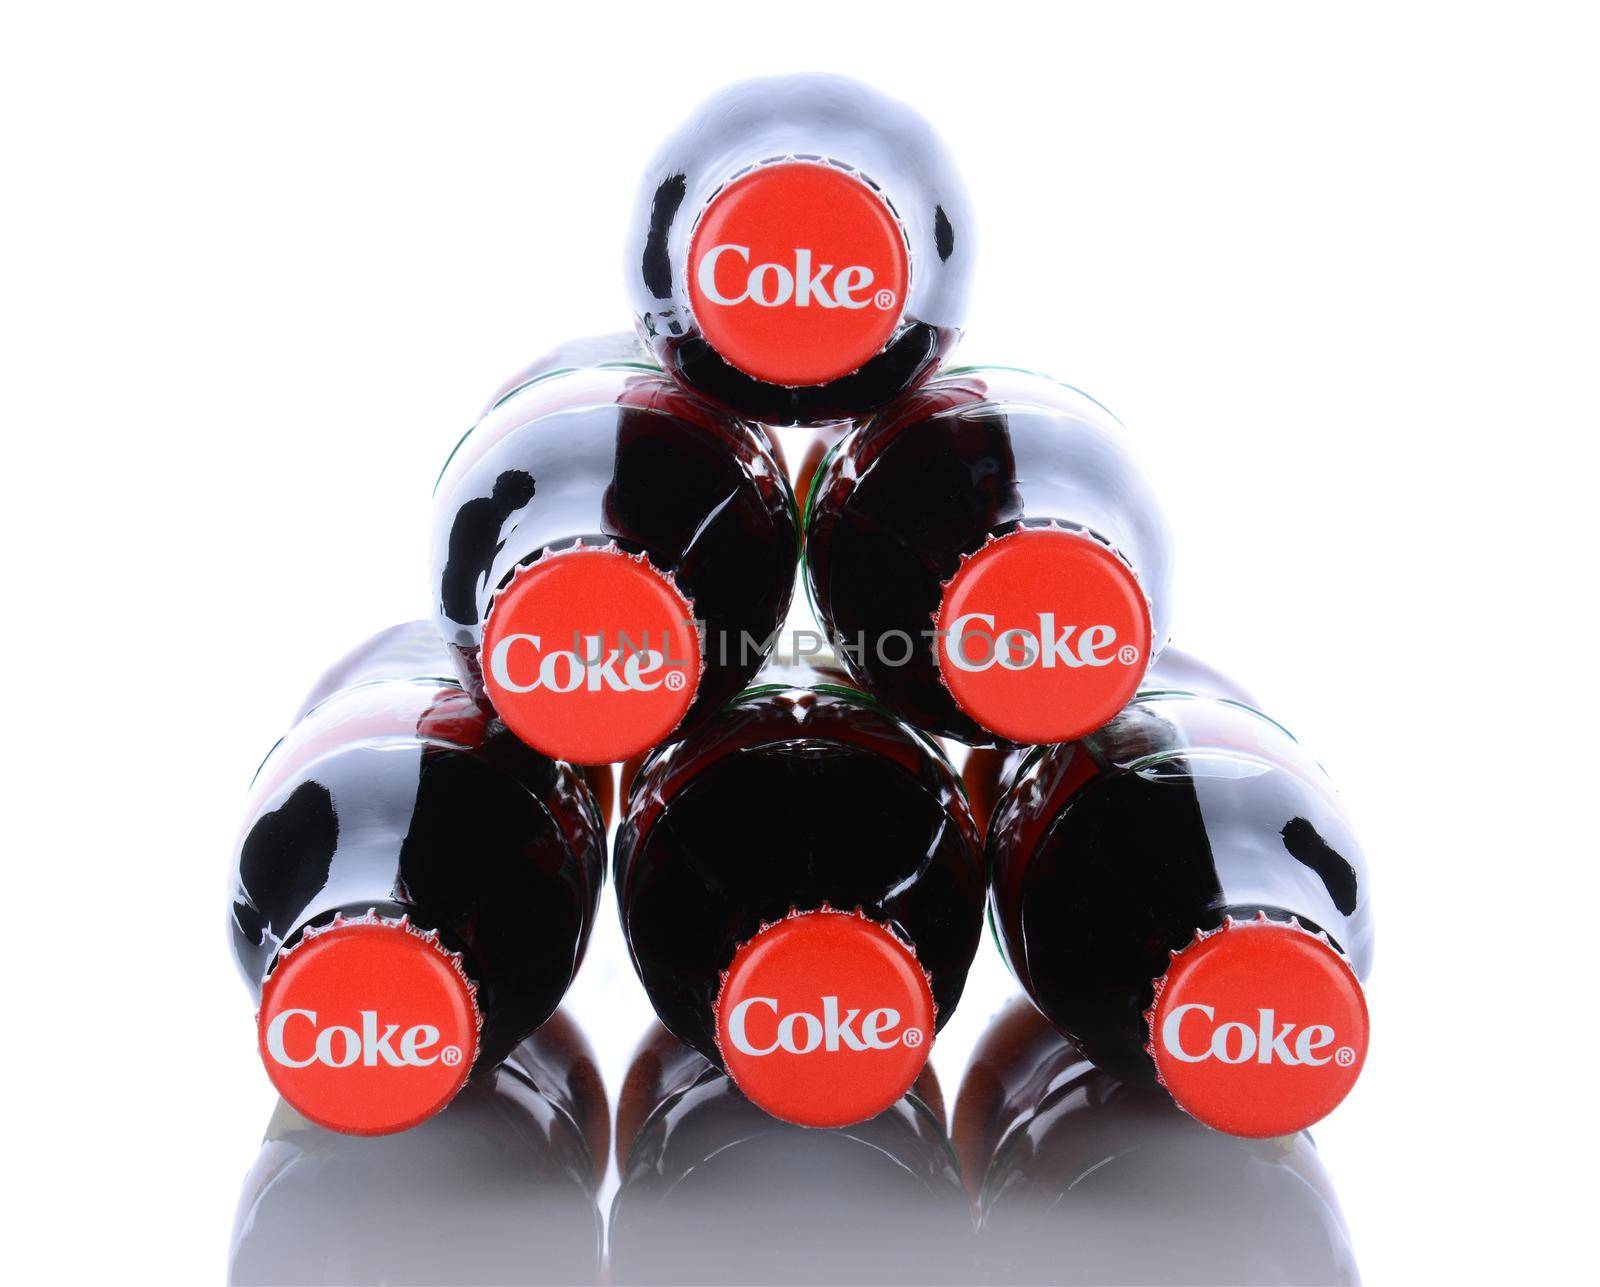 IRVINE, CA - January 29, 2014: 6 Coca-Cola Classic Bottles. Coca-Cola is the one of the worlds favorite carbonated beverages.